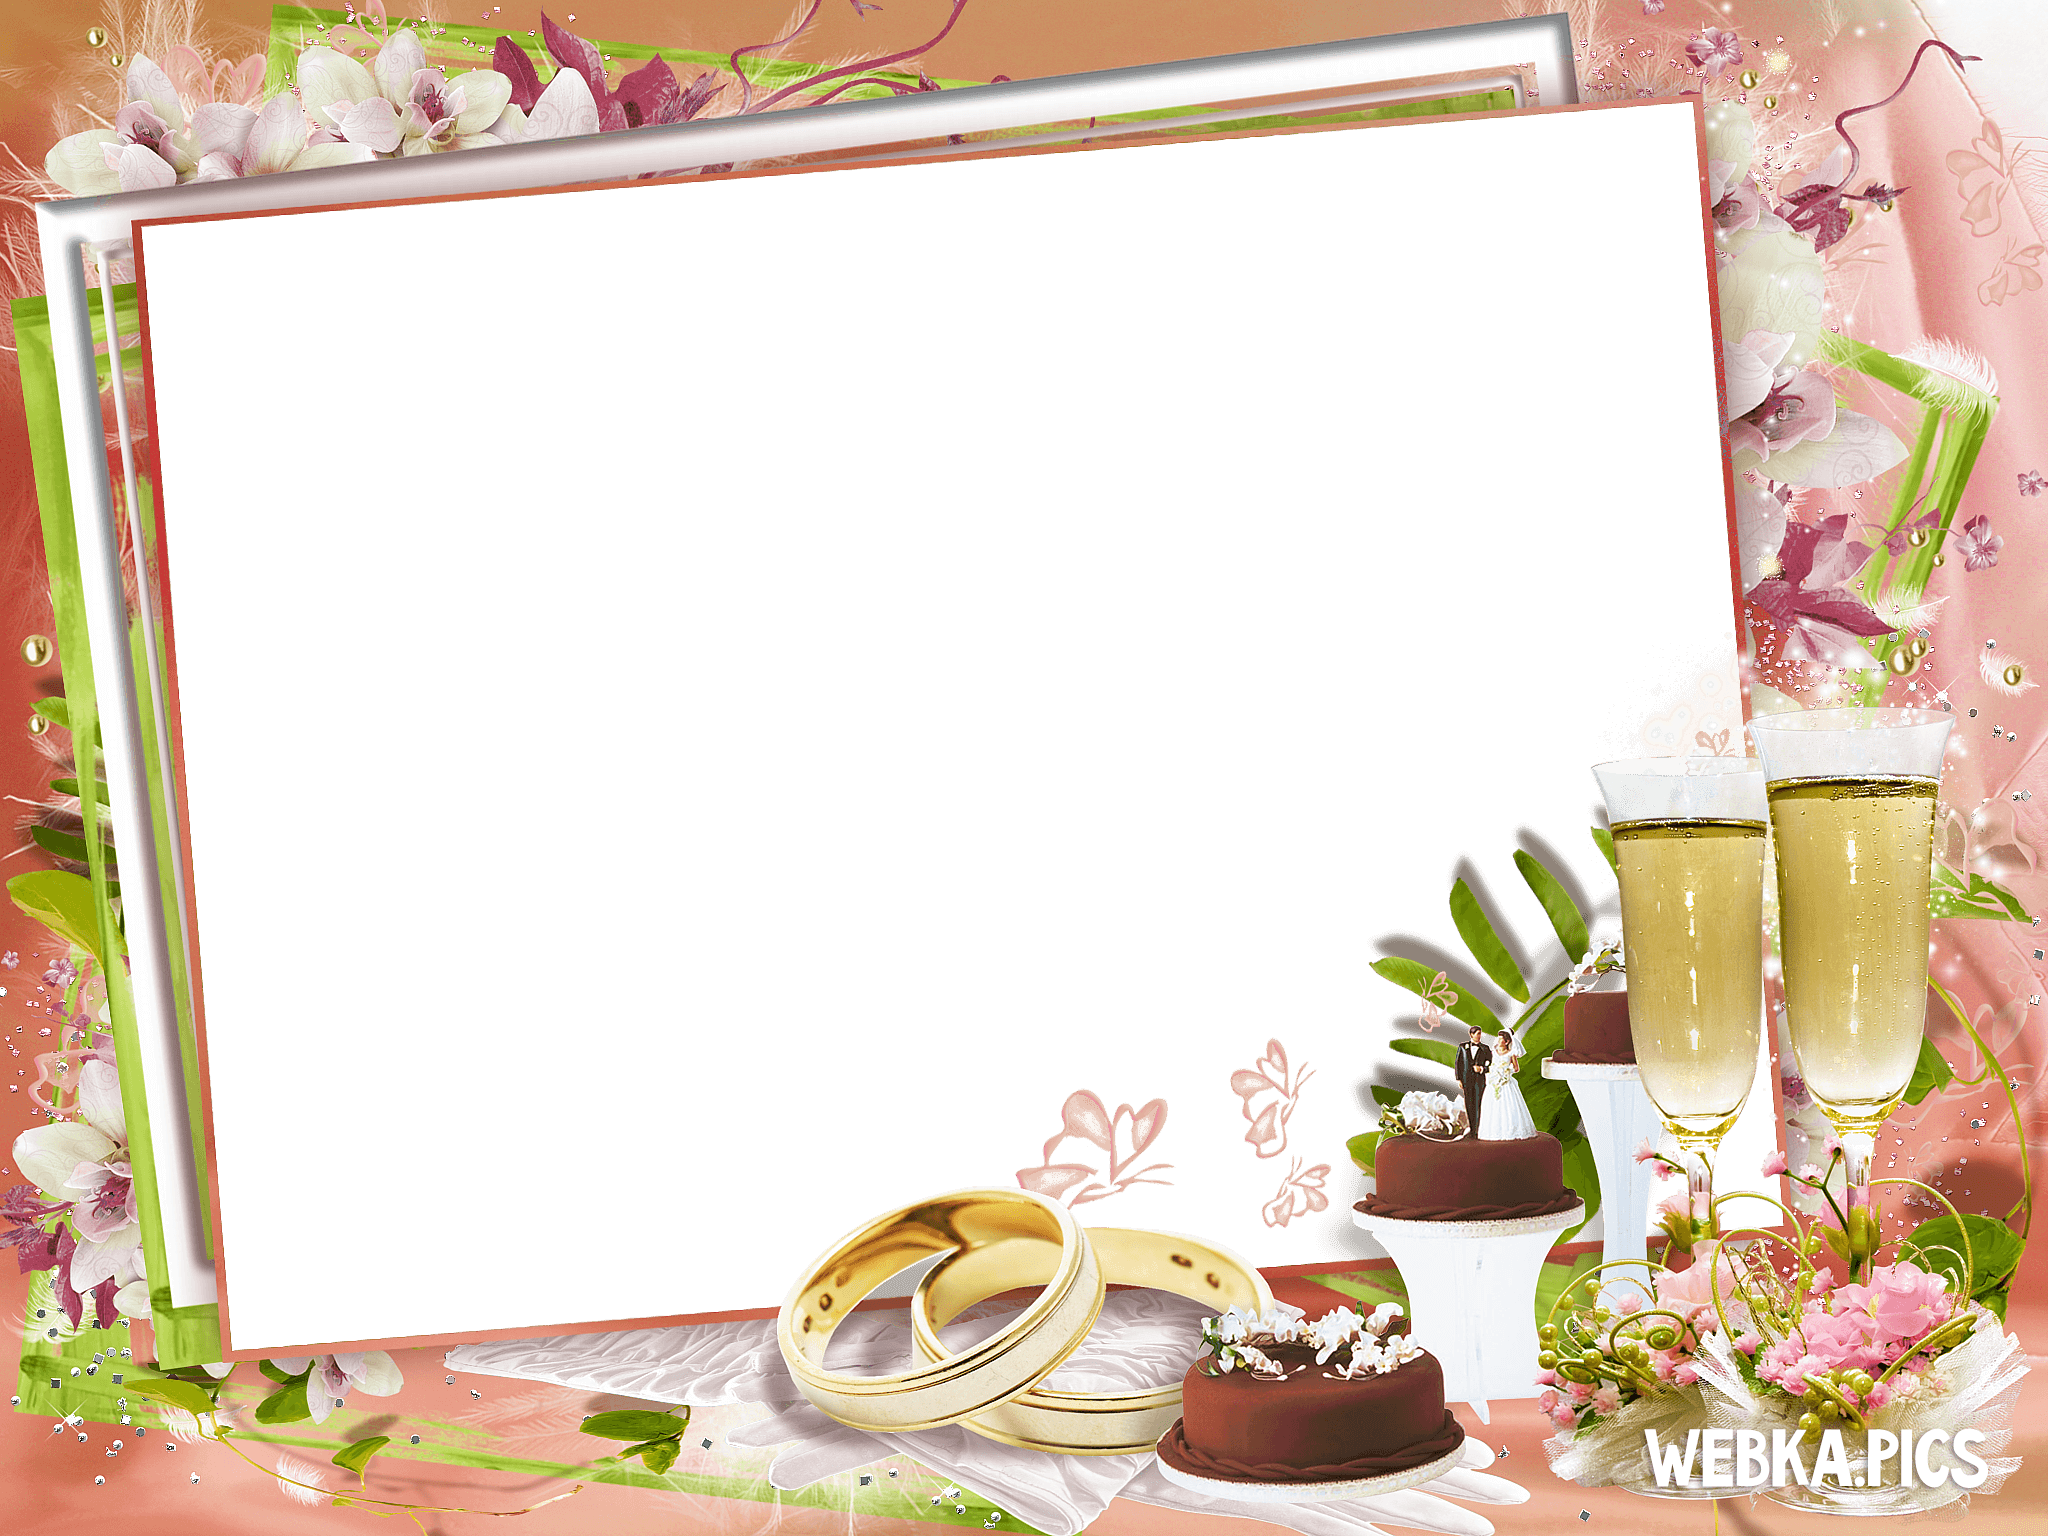 Free Download 600 Png Background Wedding Frame Designs And Templates For Your Wedding